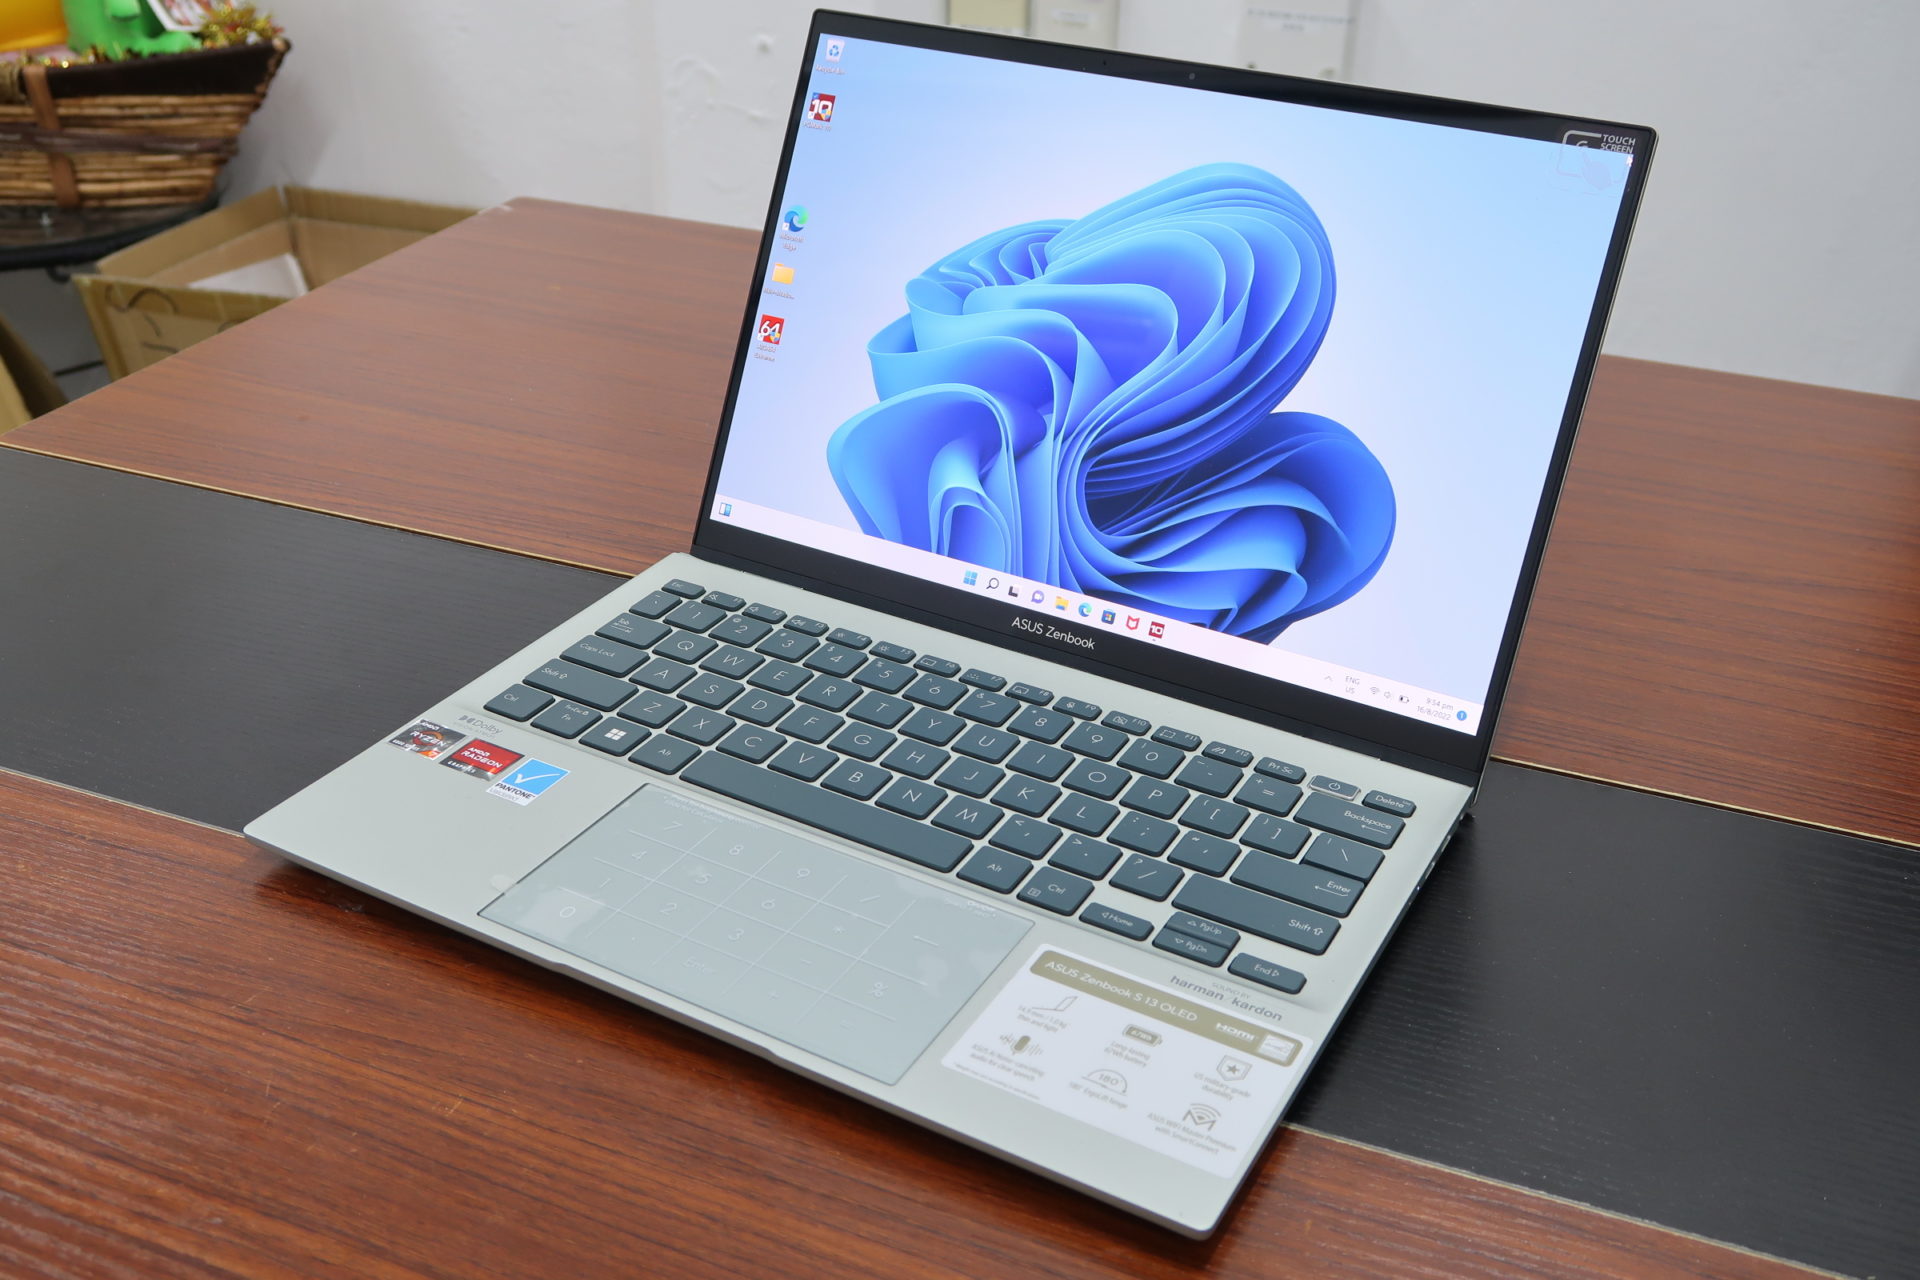 Hands-on: The Zenbook S 13 is a practical ultraportable